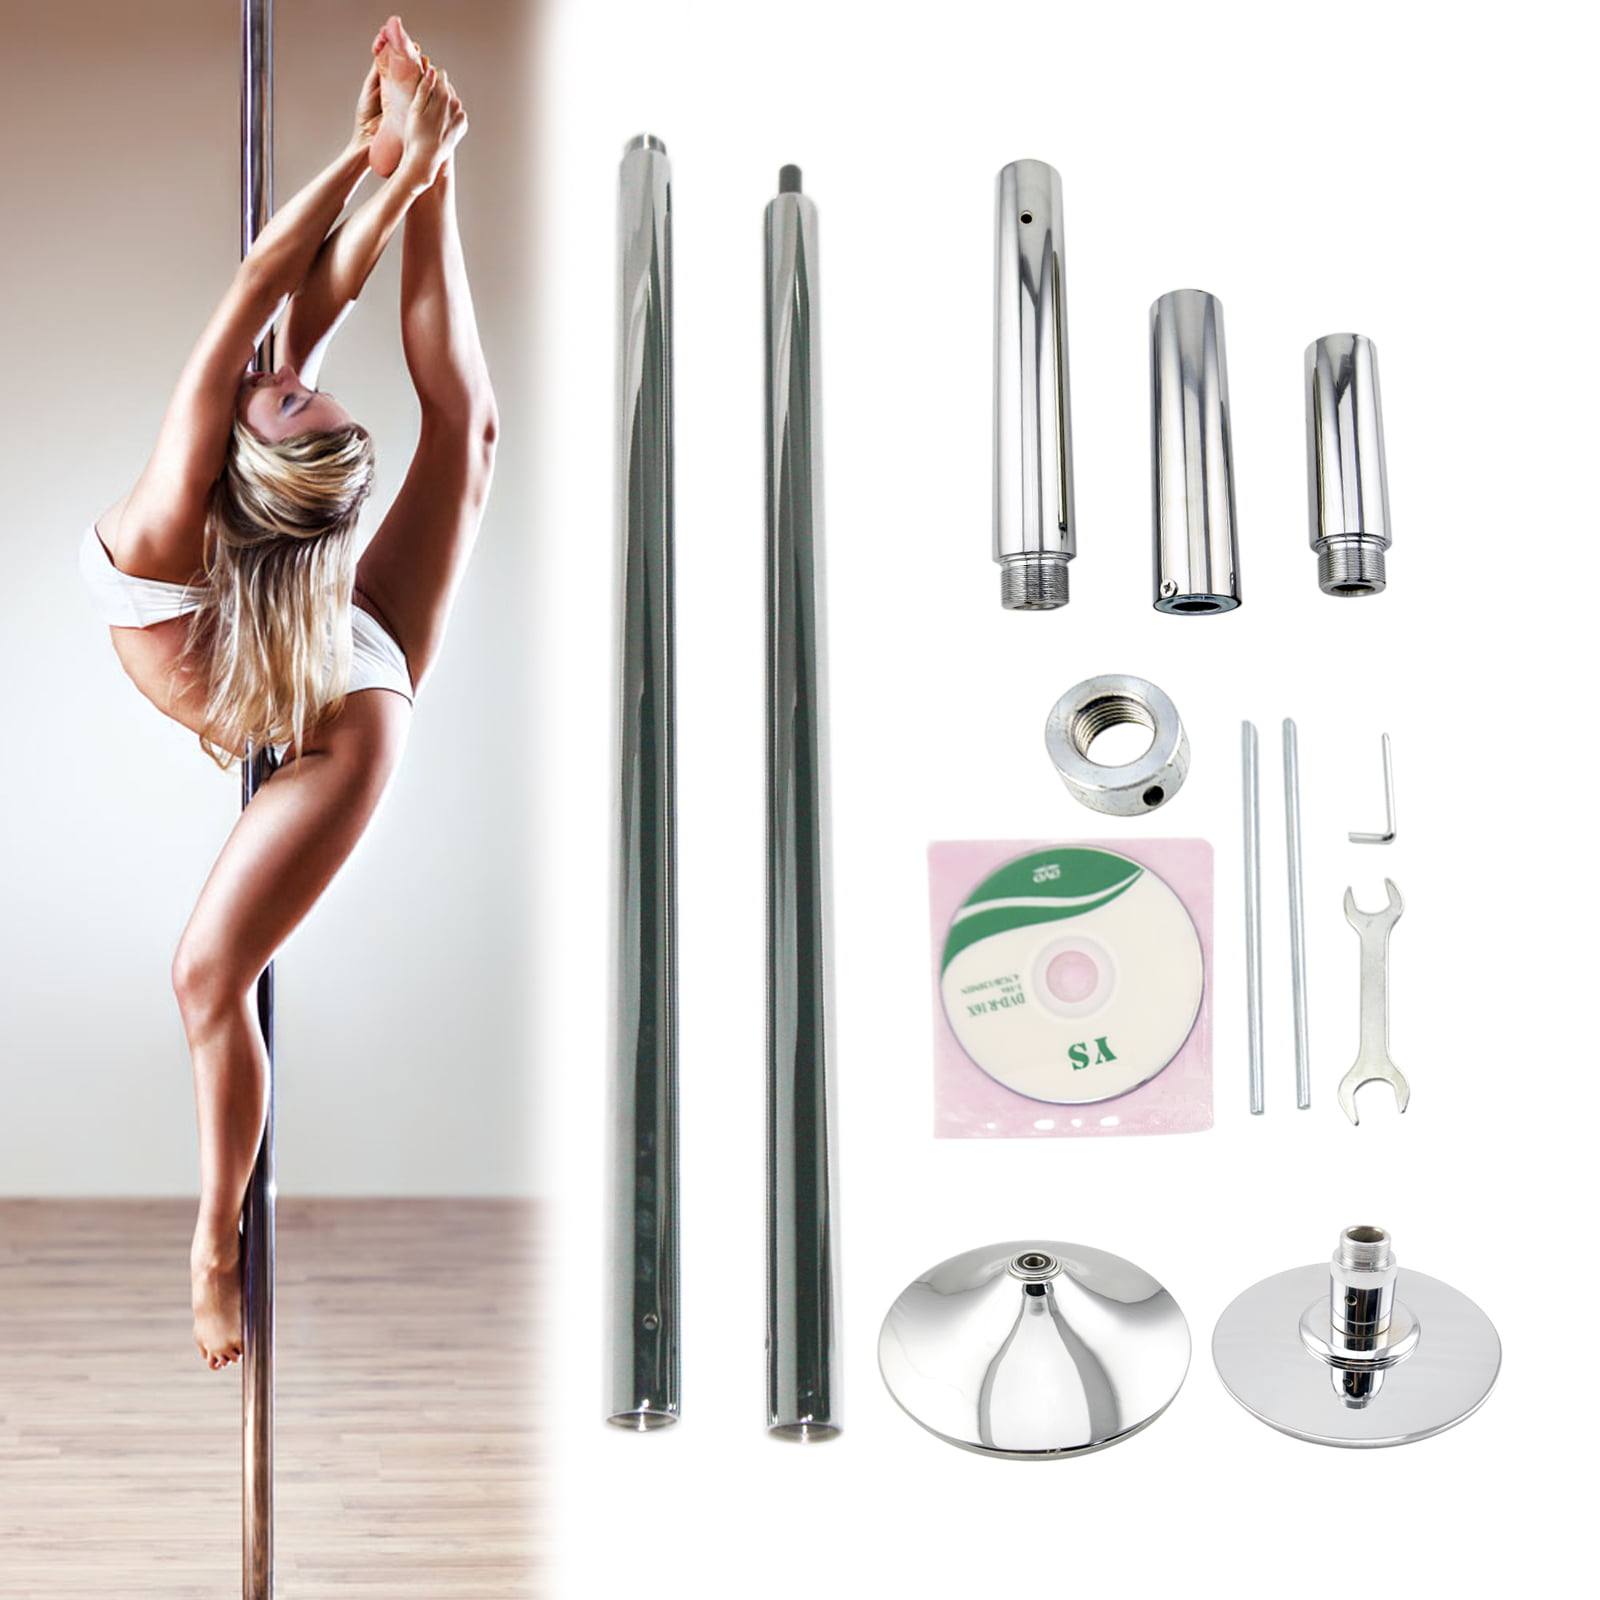 85-111 Adjustable Height Raylon Spinning and Static Dancing Pole Fitness Exercise Dance Tube for Home Pub Party Gym 45mm Diameter Portable Stripper Pole